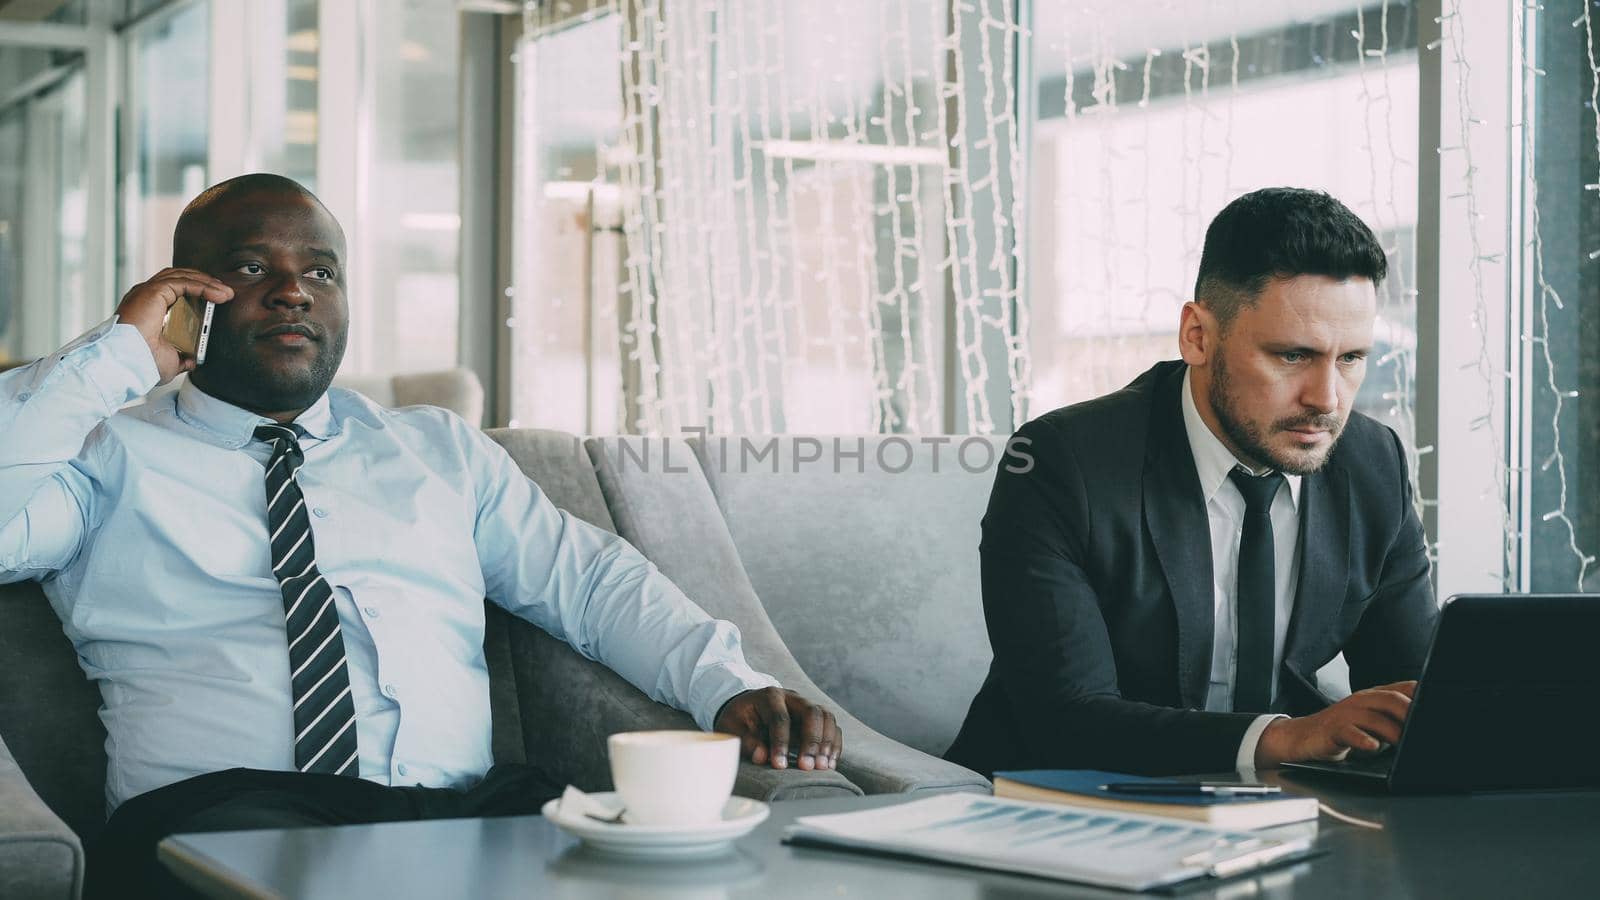 Bearded Caucasian businessman in formal clothes printing business information on his laptop and his African American partner talking on smartphone while sitting in stylish cafe during lunch.